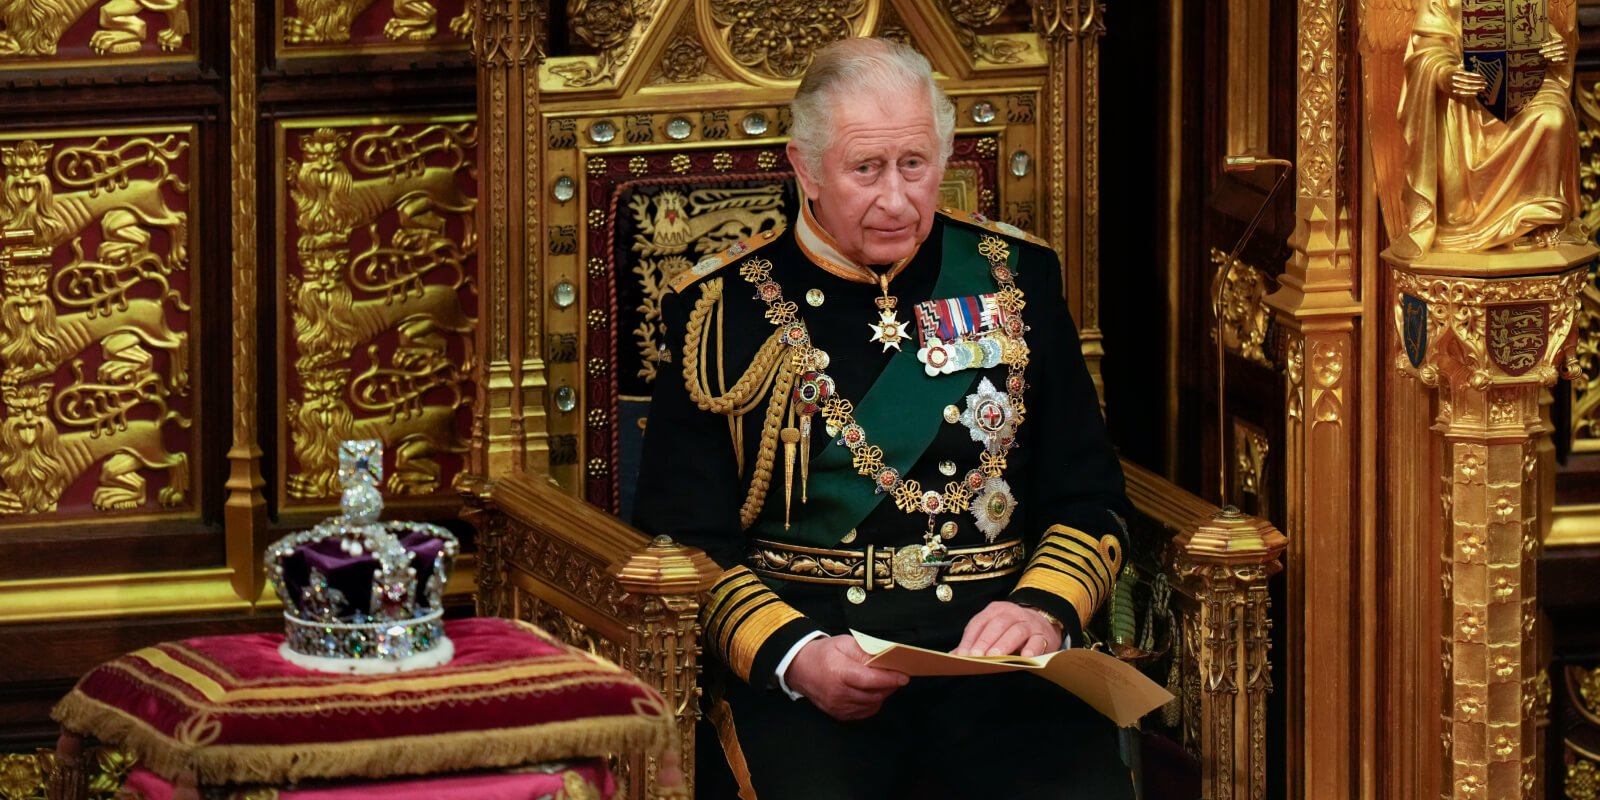 King Charles III will wear the St. Edward's Crown during his coronation in May 2023.